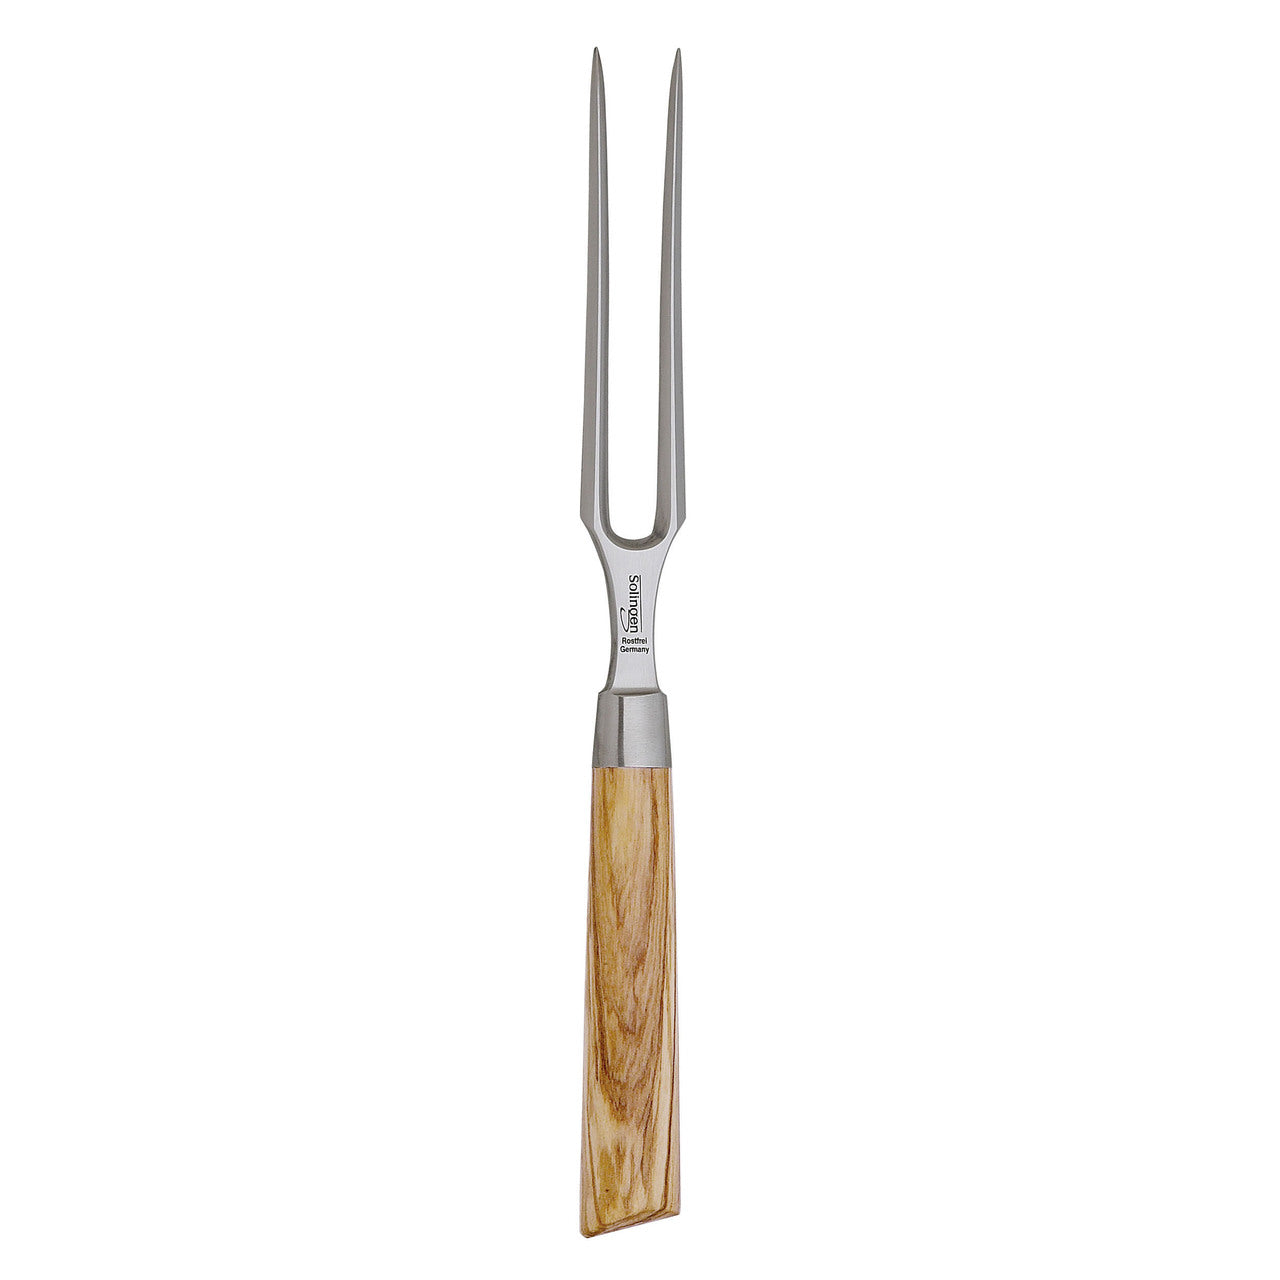 BEON.COM.AU E6805 6         Oliva Elite 6 Inch Straight Carving Fork The Messermeister Oliva Elite 6 Inch Straight Carving Fork has a beautiful Mediterranean olive wood handle and fully forged fork tines. It is the idean accompaniment to any Messermeister carving knife. The straight tines hold meat in place ... Messermeister at BEON.COM.AU